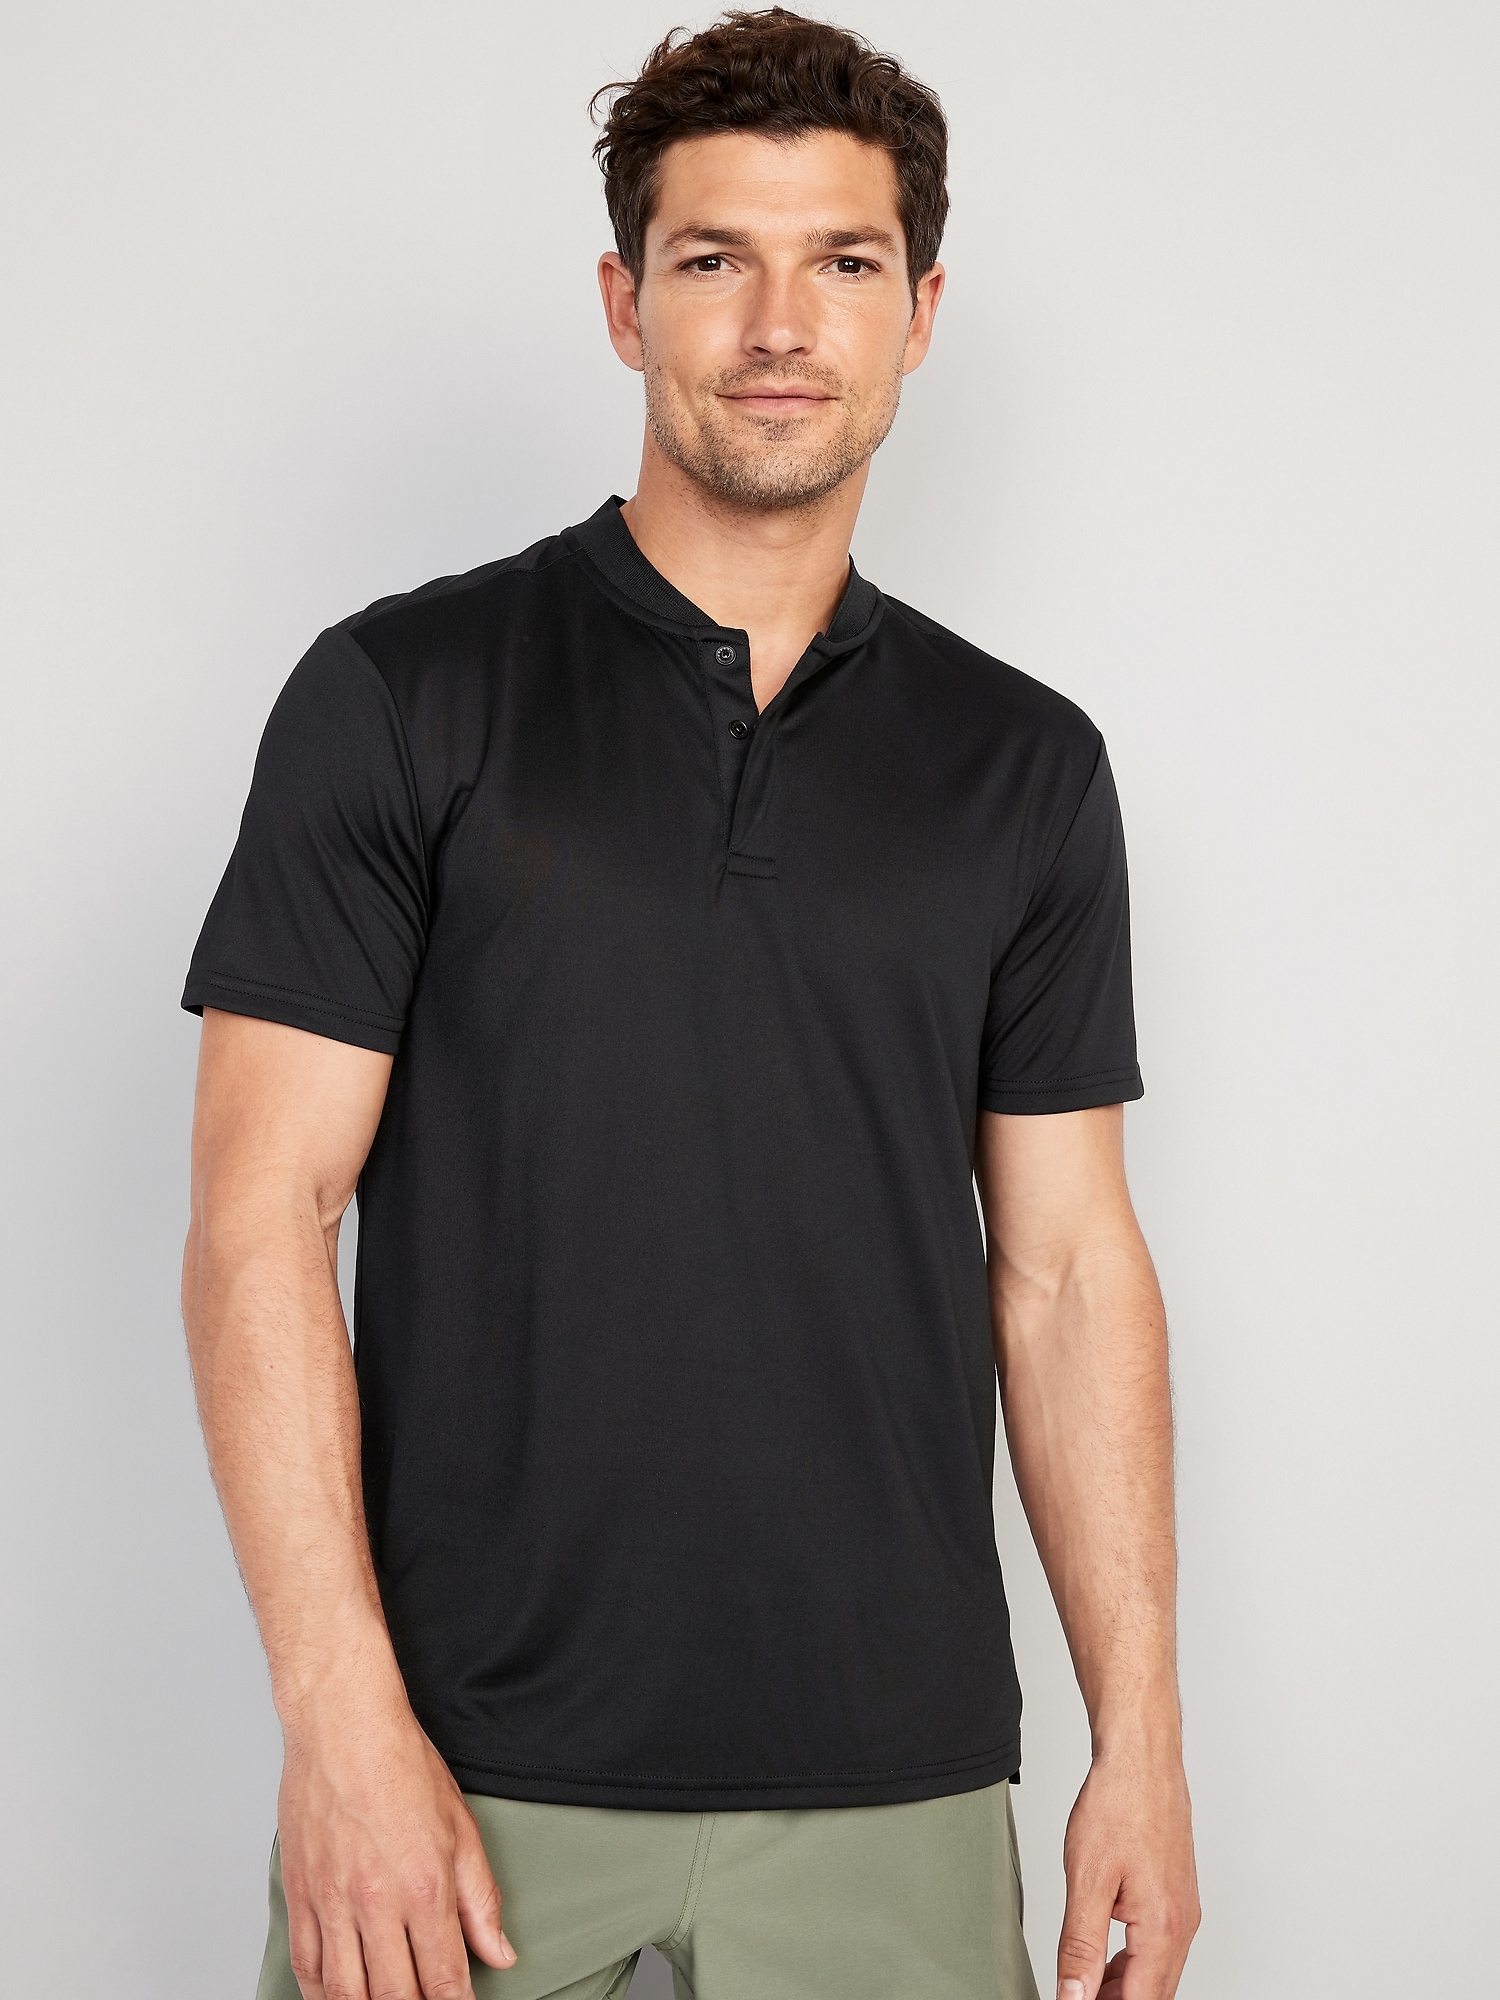 Old Navy Performance Core Banded-Collar Polo for Men black. 1